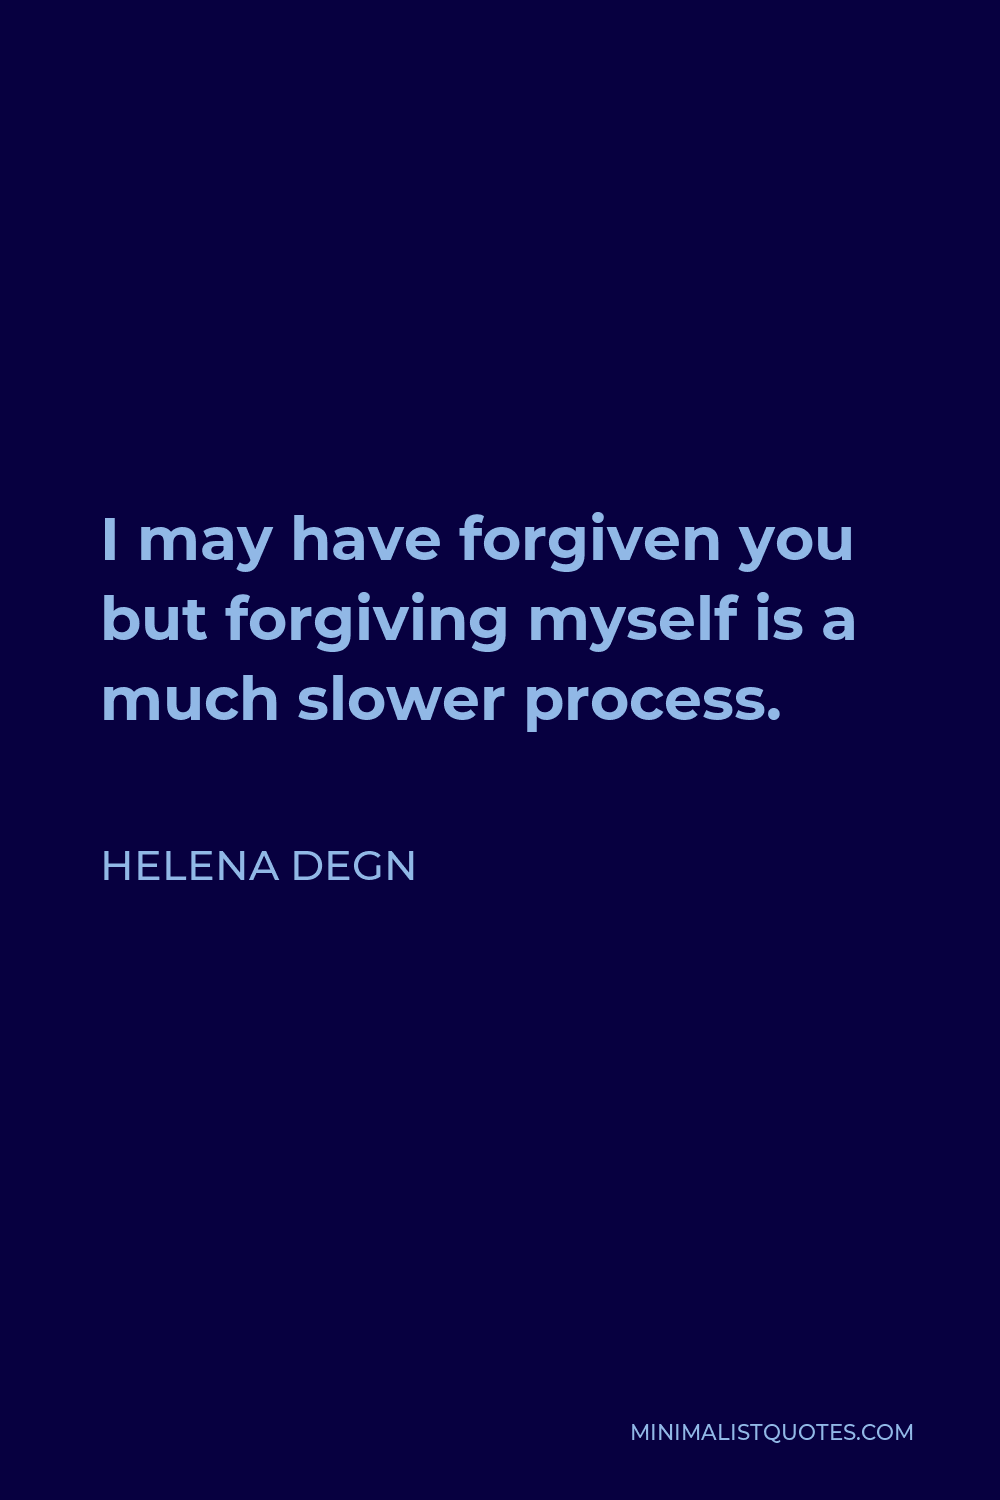 Helena Degn Quote - I may have forgiven you but forgiving myself is a much slower process.